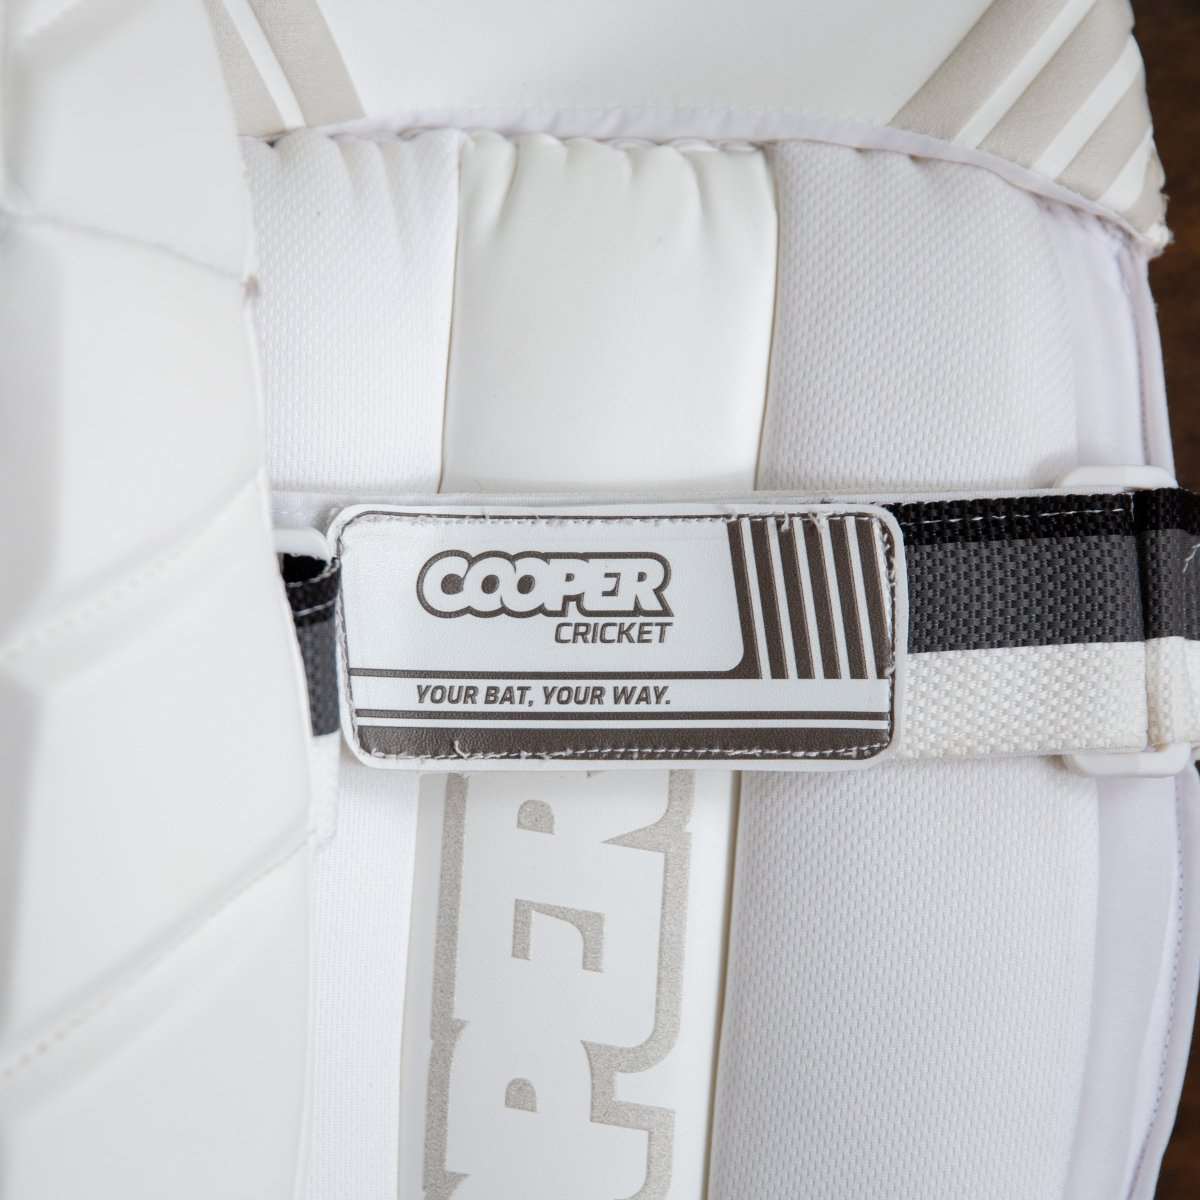 KEEPING PADS - Cooper Cricket